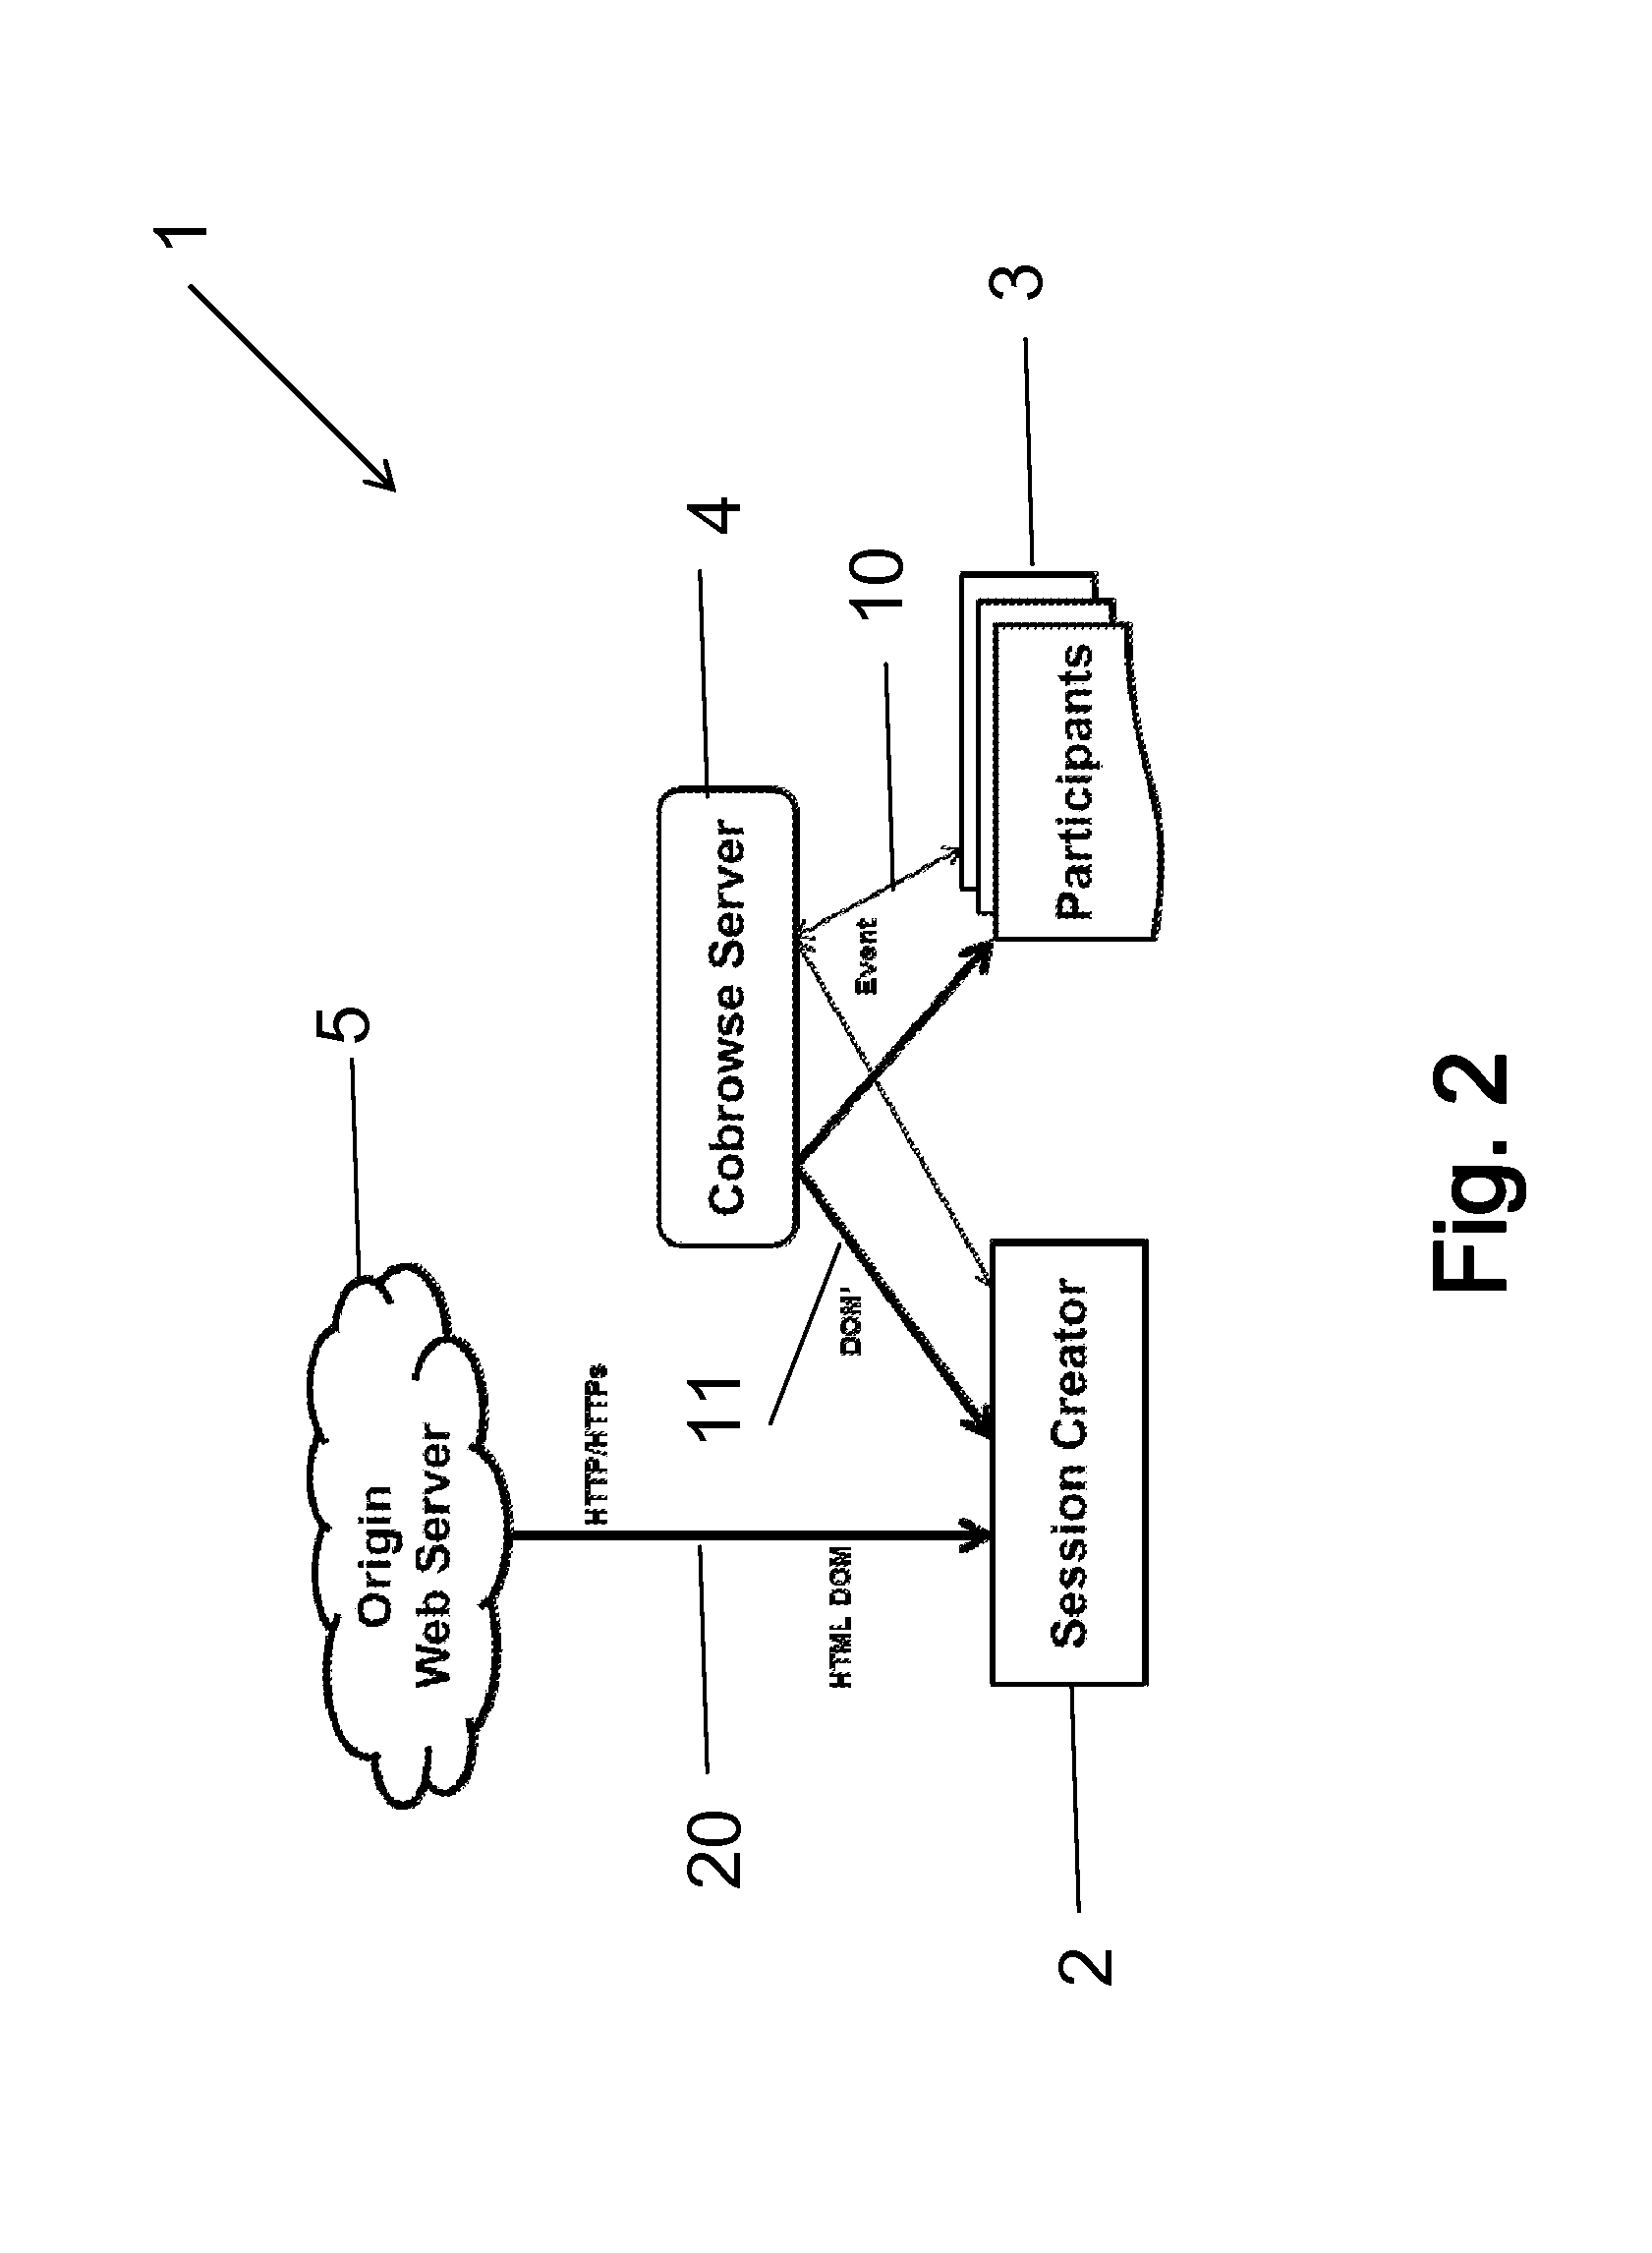 Method and system for providing a multiuser web session